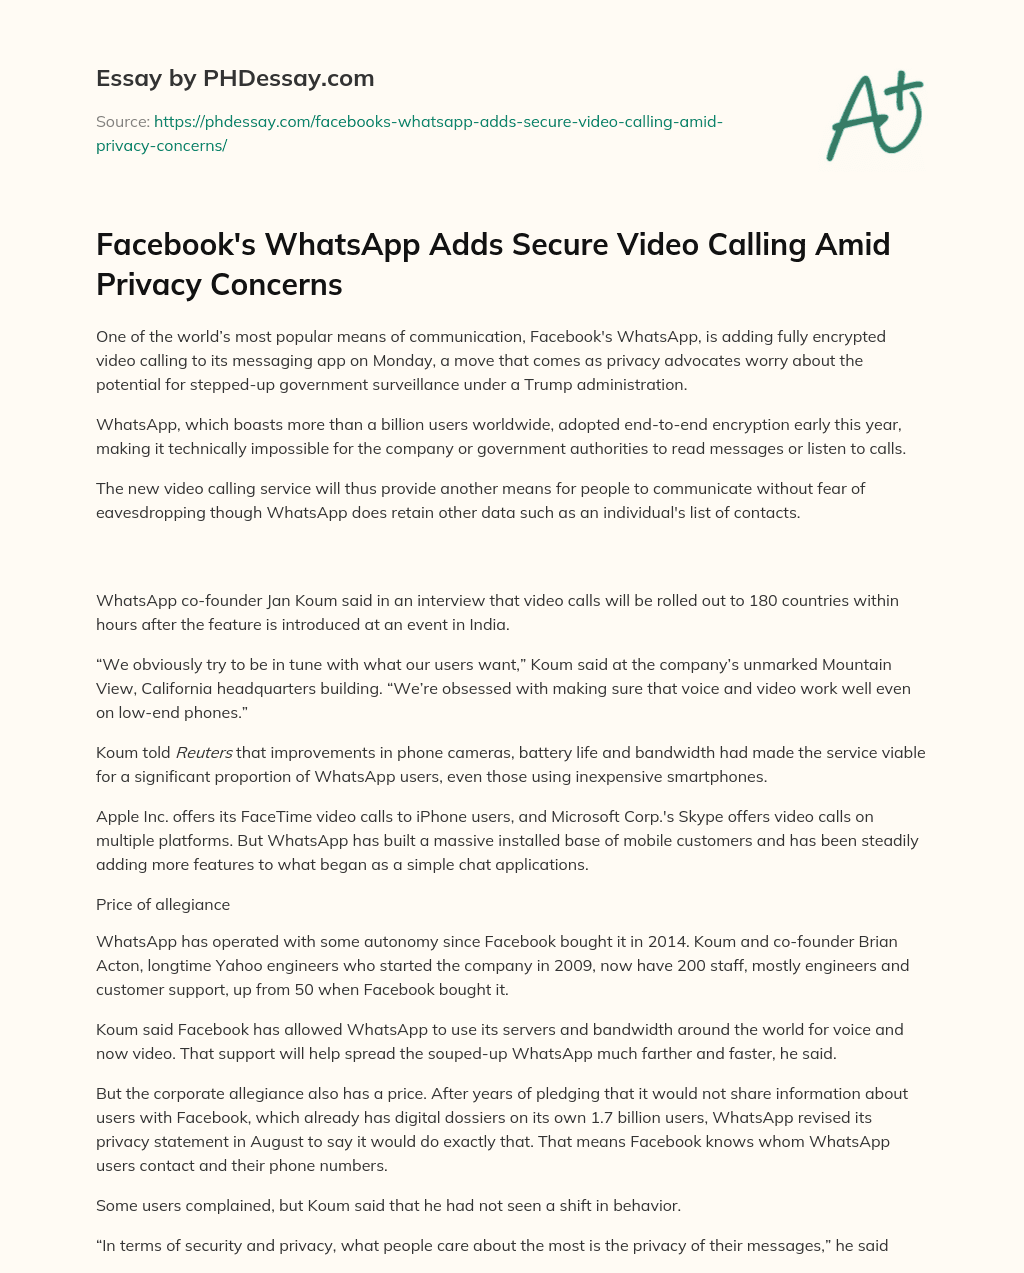 Facebook’s WhatsApp Adds Secure Video Calling Amid Privacy Concerns essay